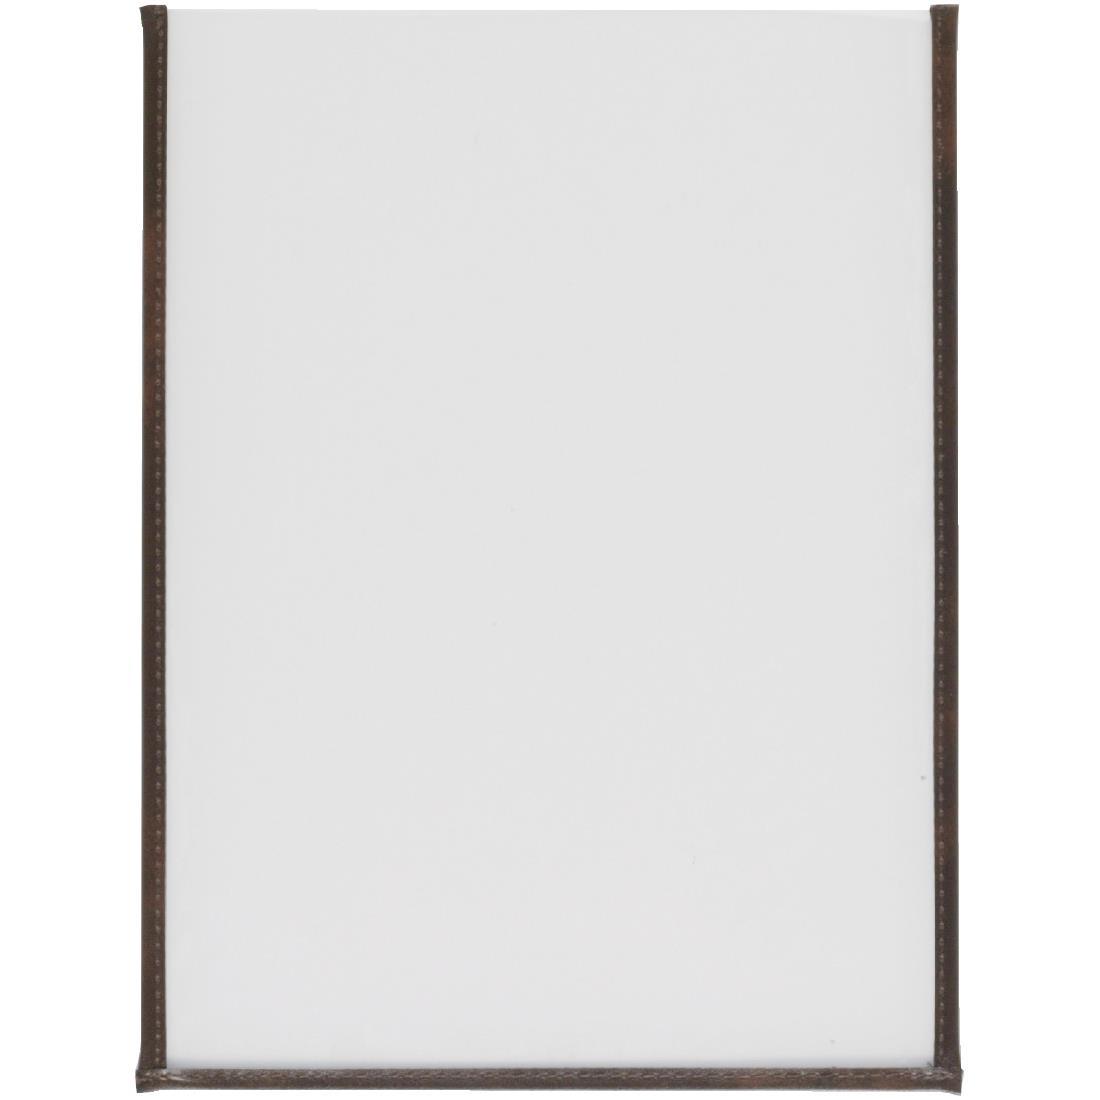 Securit Crystal Double Sided Menu Cover A4 Single (Pack of 3) - CB841  - 1